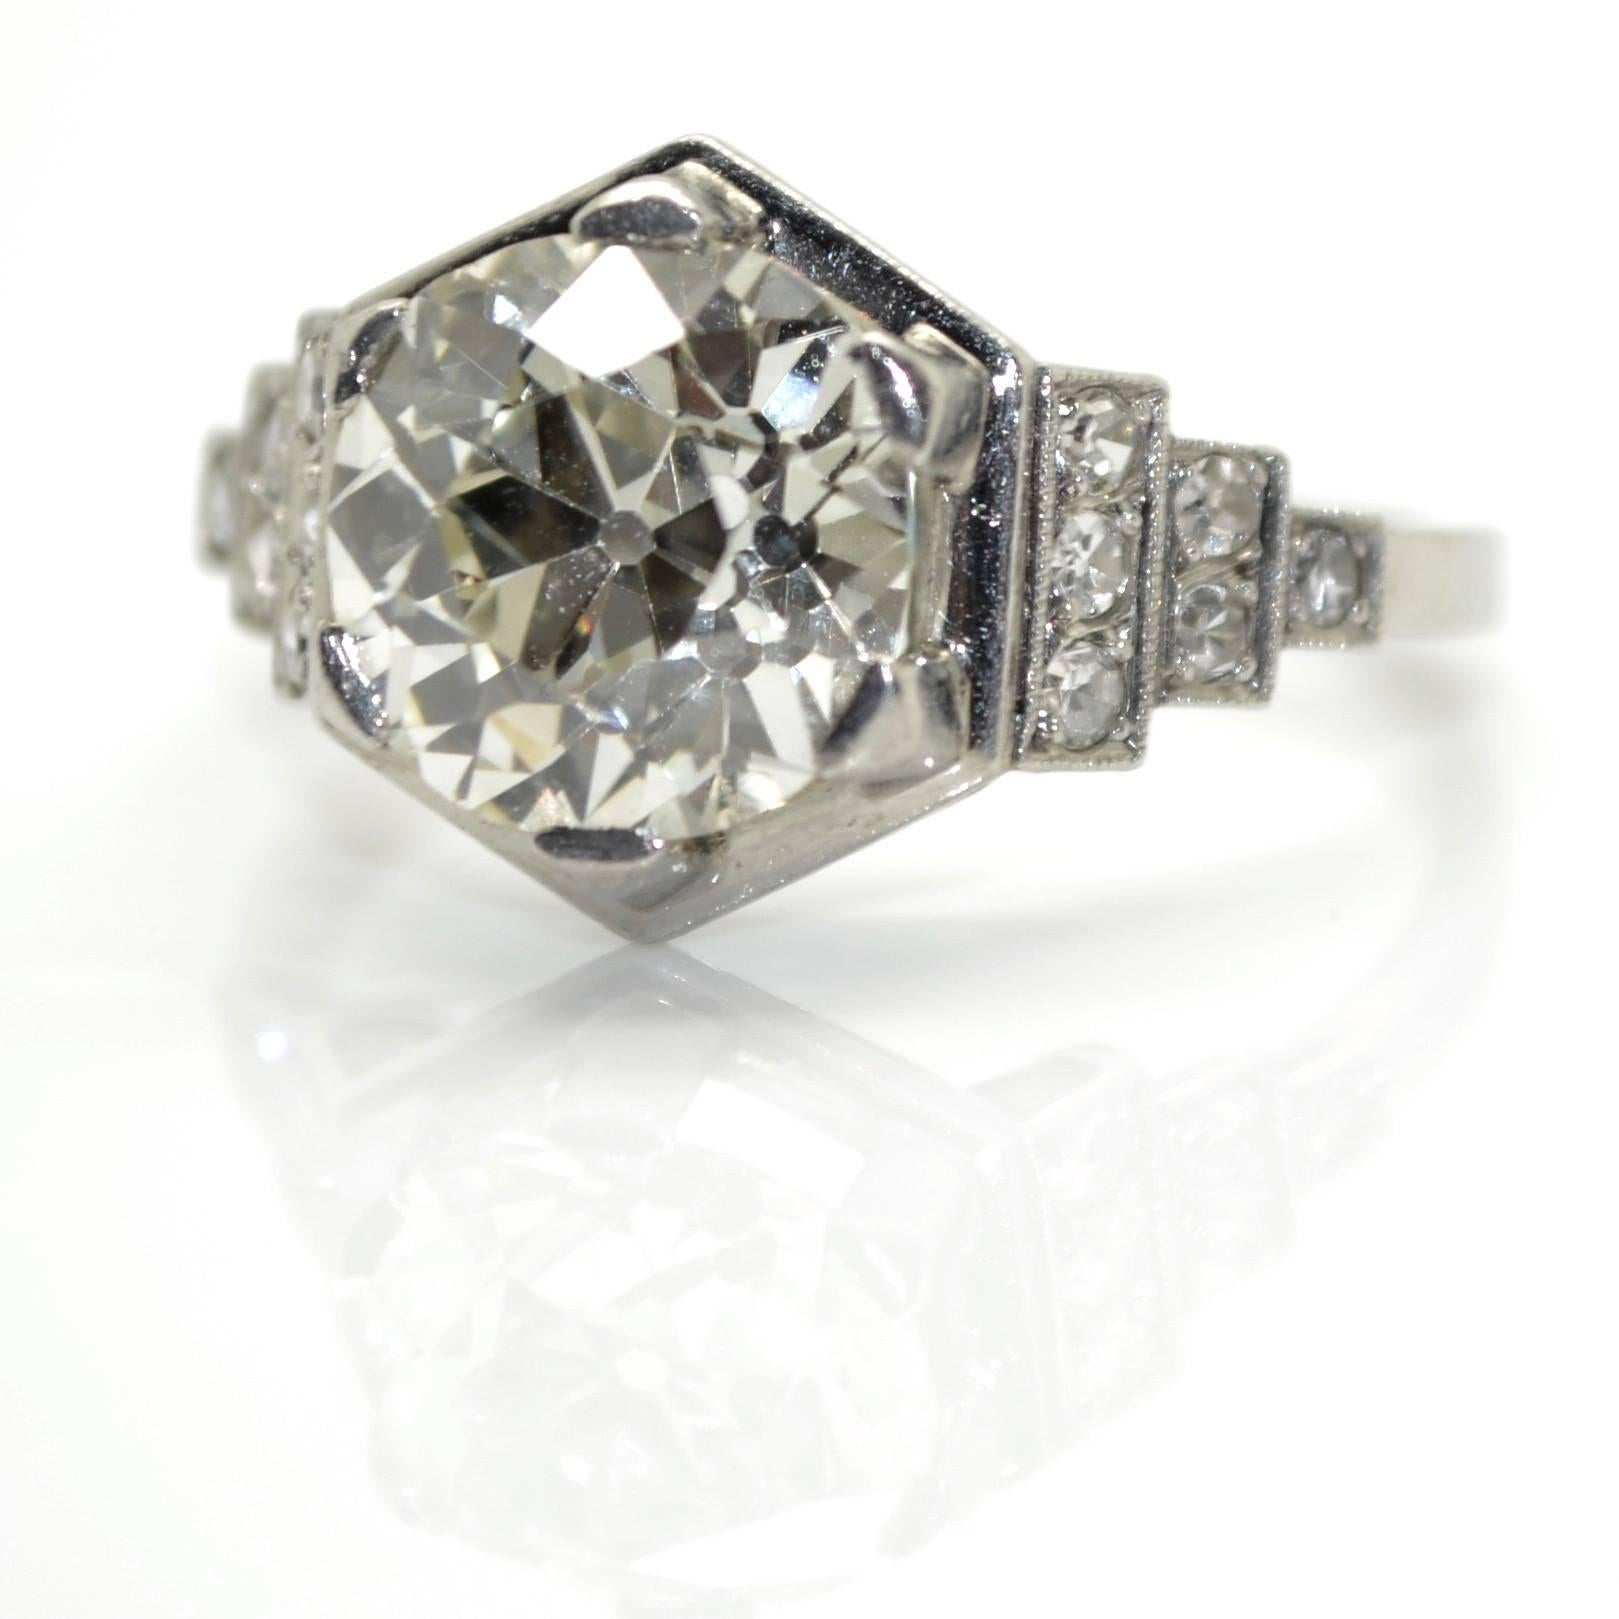 French Art-Deco platinum solitaire ring with graduating stepped shoulders, circa 1930
The central old European cut diamond has an estimated weight of 3,50 carats (J-K color and VS clarity).
This rare hexagonal ring weighting 5,70g is pavé set with